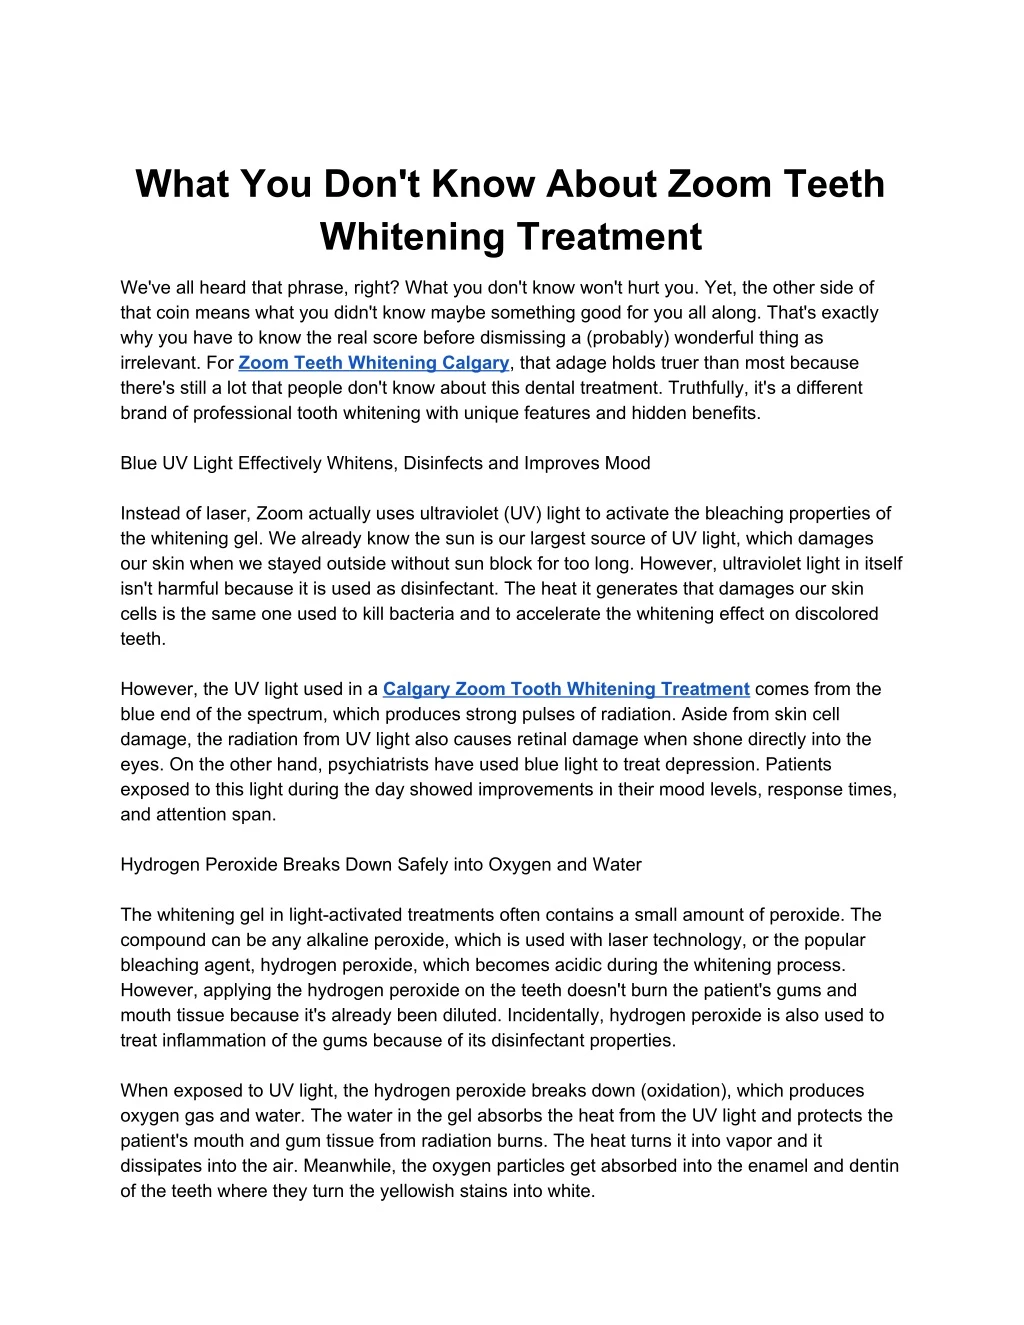 what you don t know about zoom teeth whitening